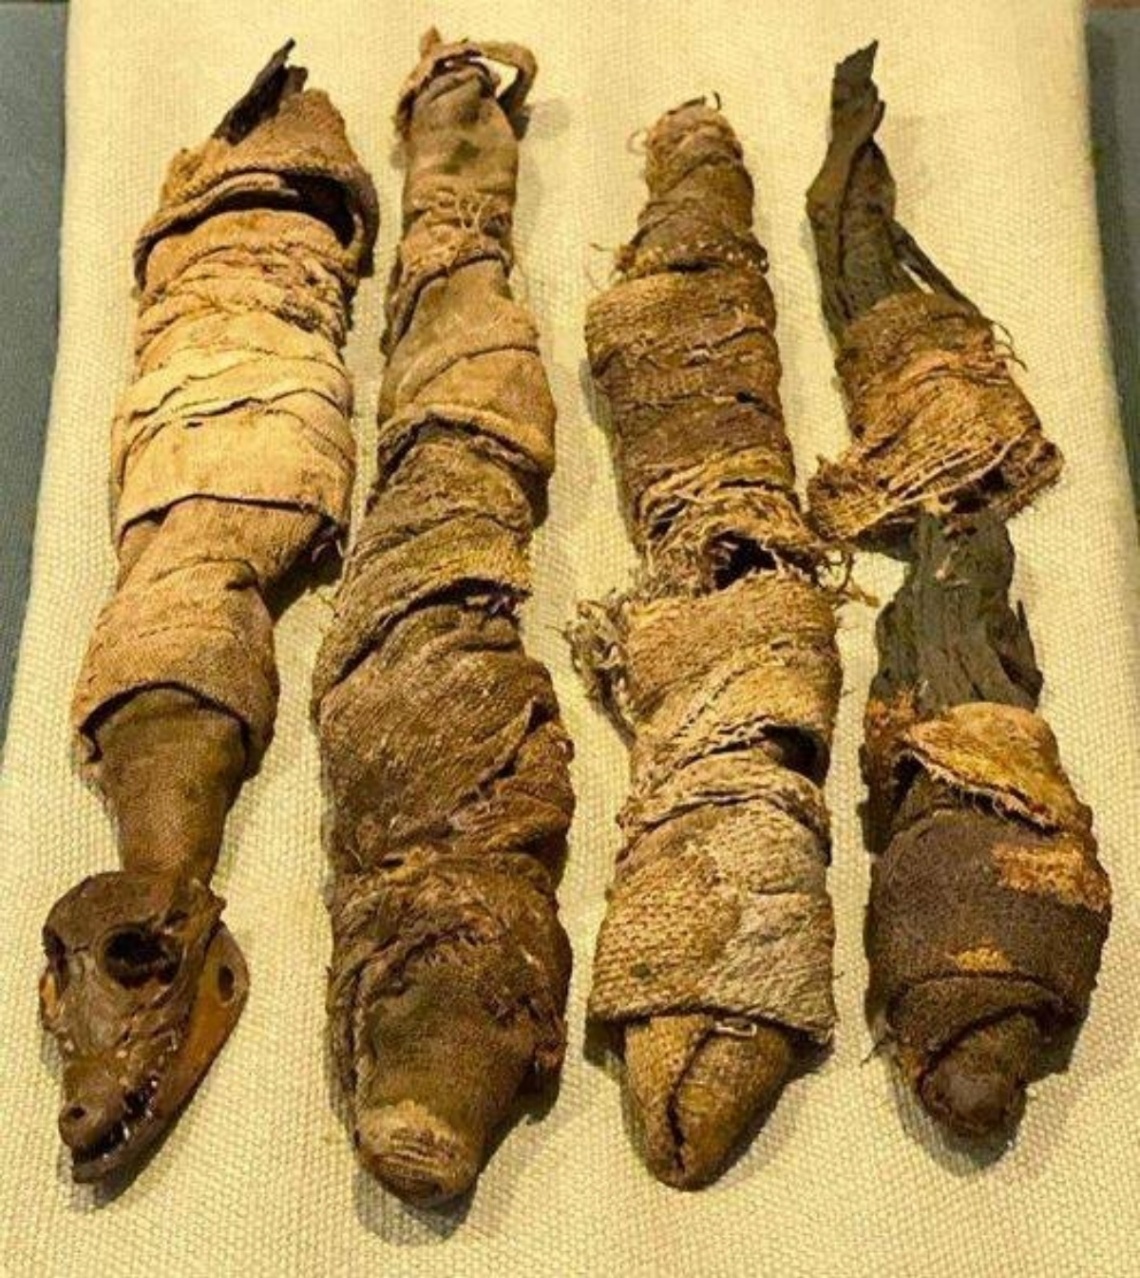 4 mummified baby crocodiles from Egypt Ptolemaic or Roman Era, 332 BC-250 AD on display in the National Museum of Natural History, one of the Smithsonians in Washington, DC, USA. (Details in comments👇)  #AlienEncounters #AncientMysteries